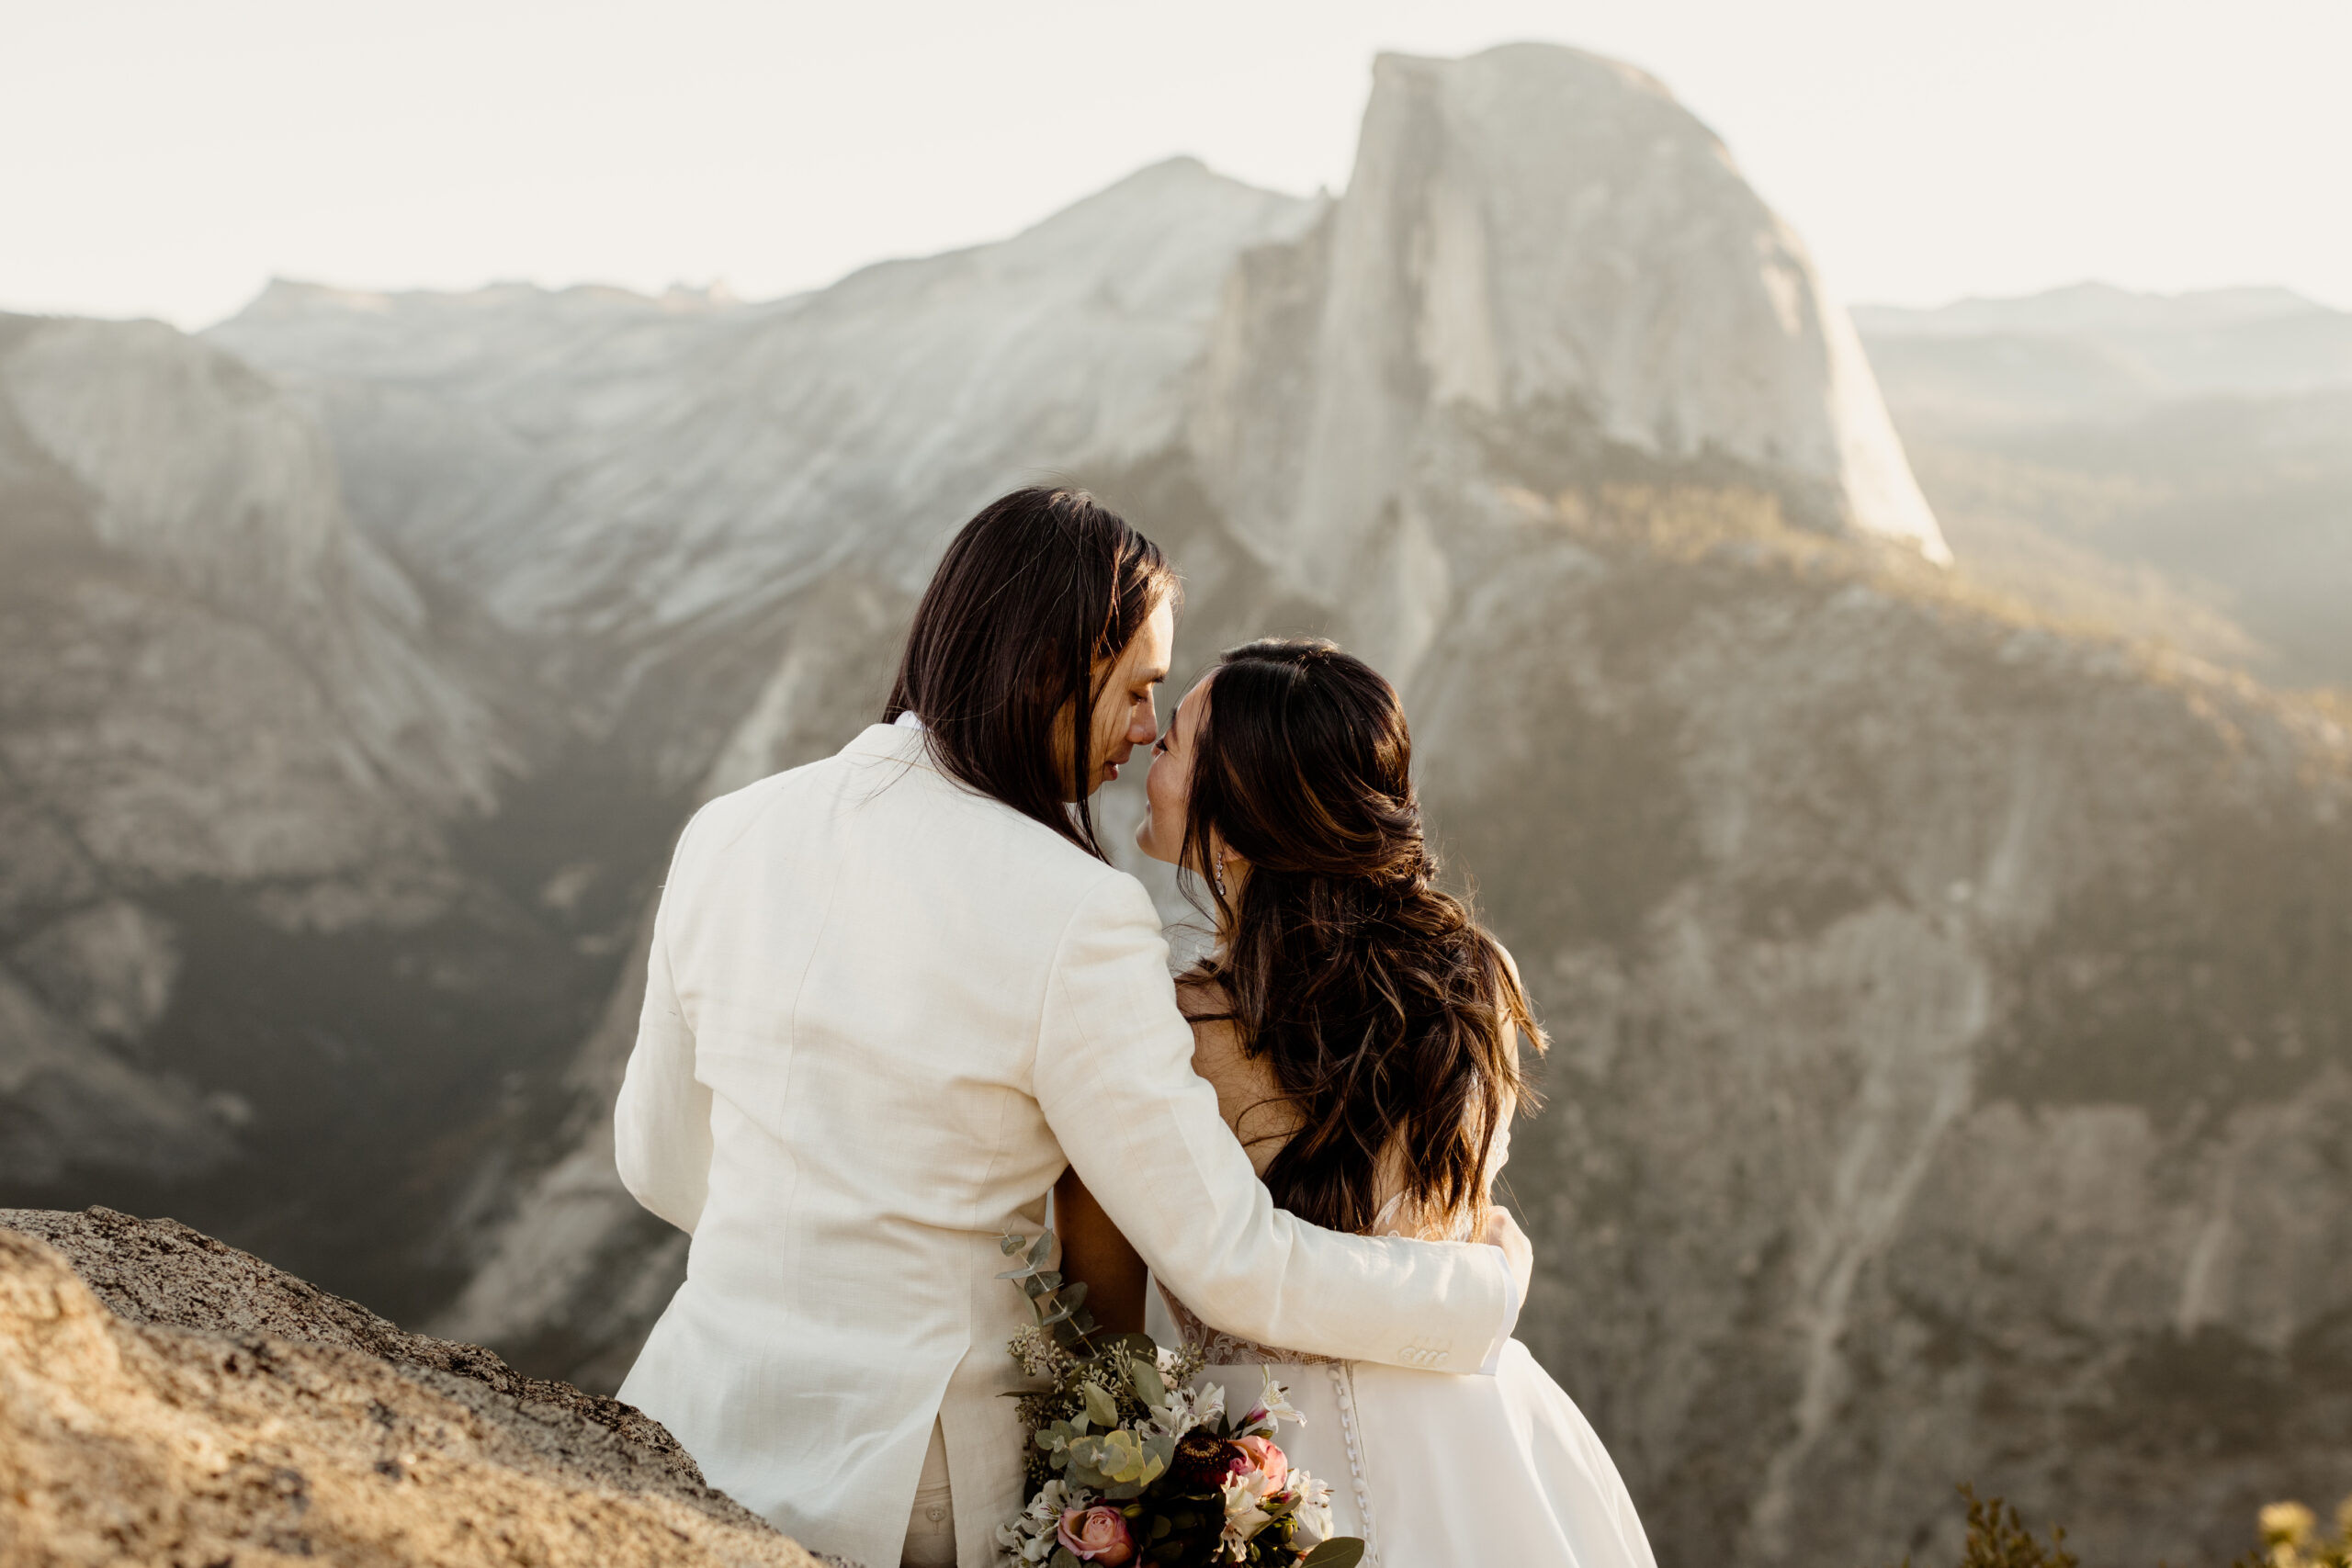 Couples kisses with half dome in the background